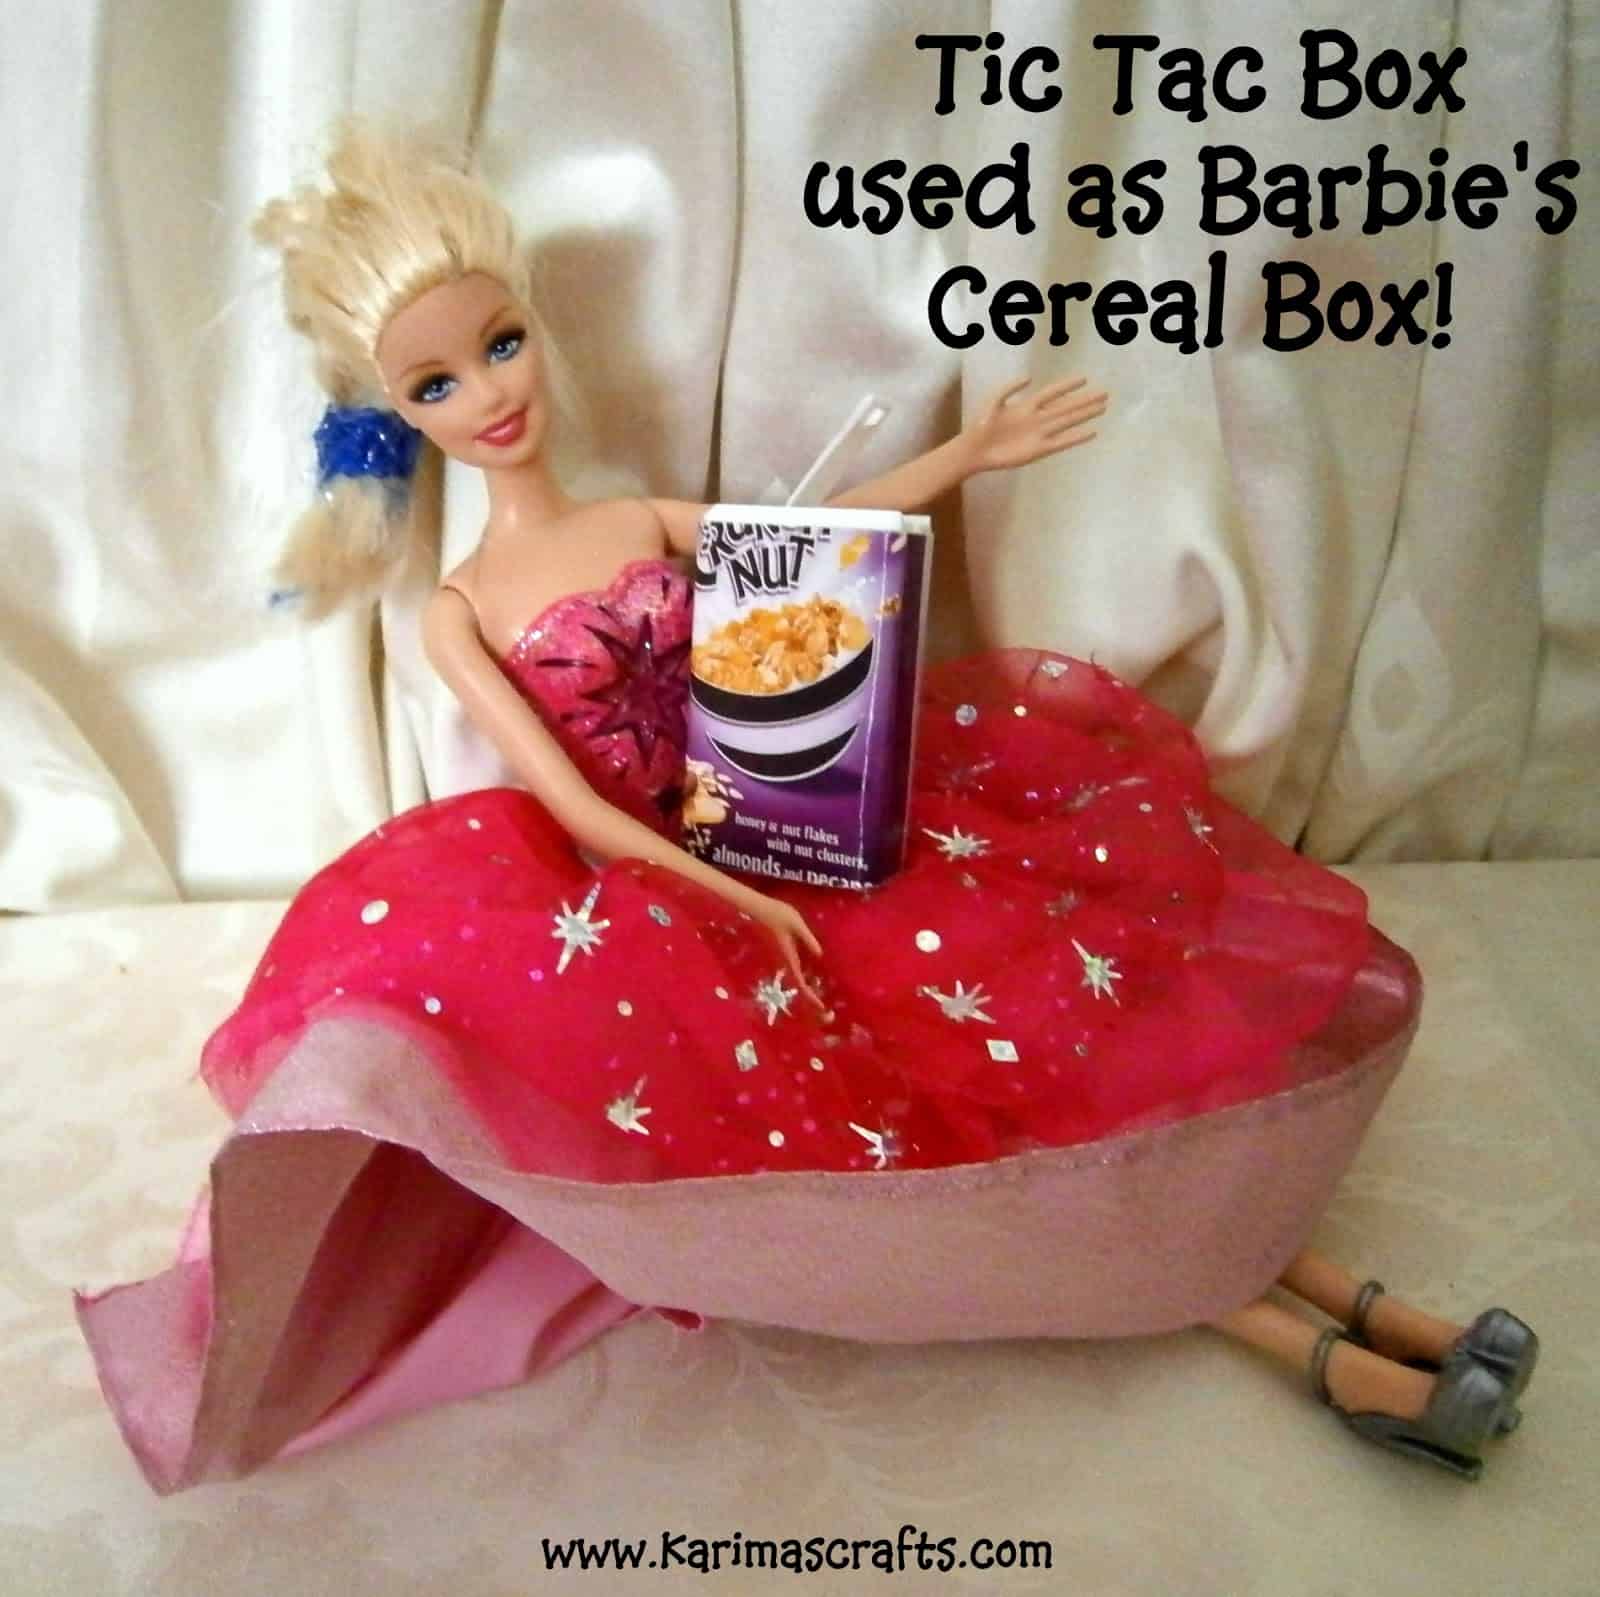 Interesting crafts made with Tic Tac boxes